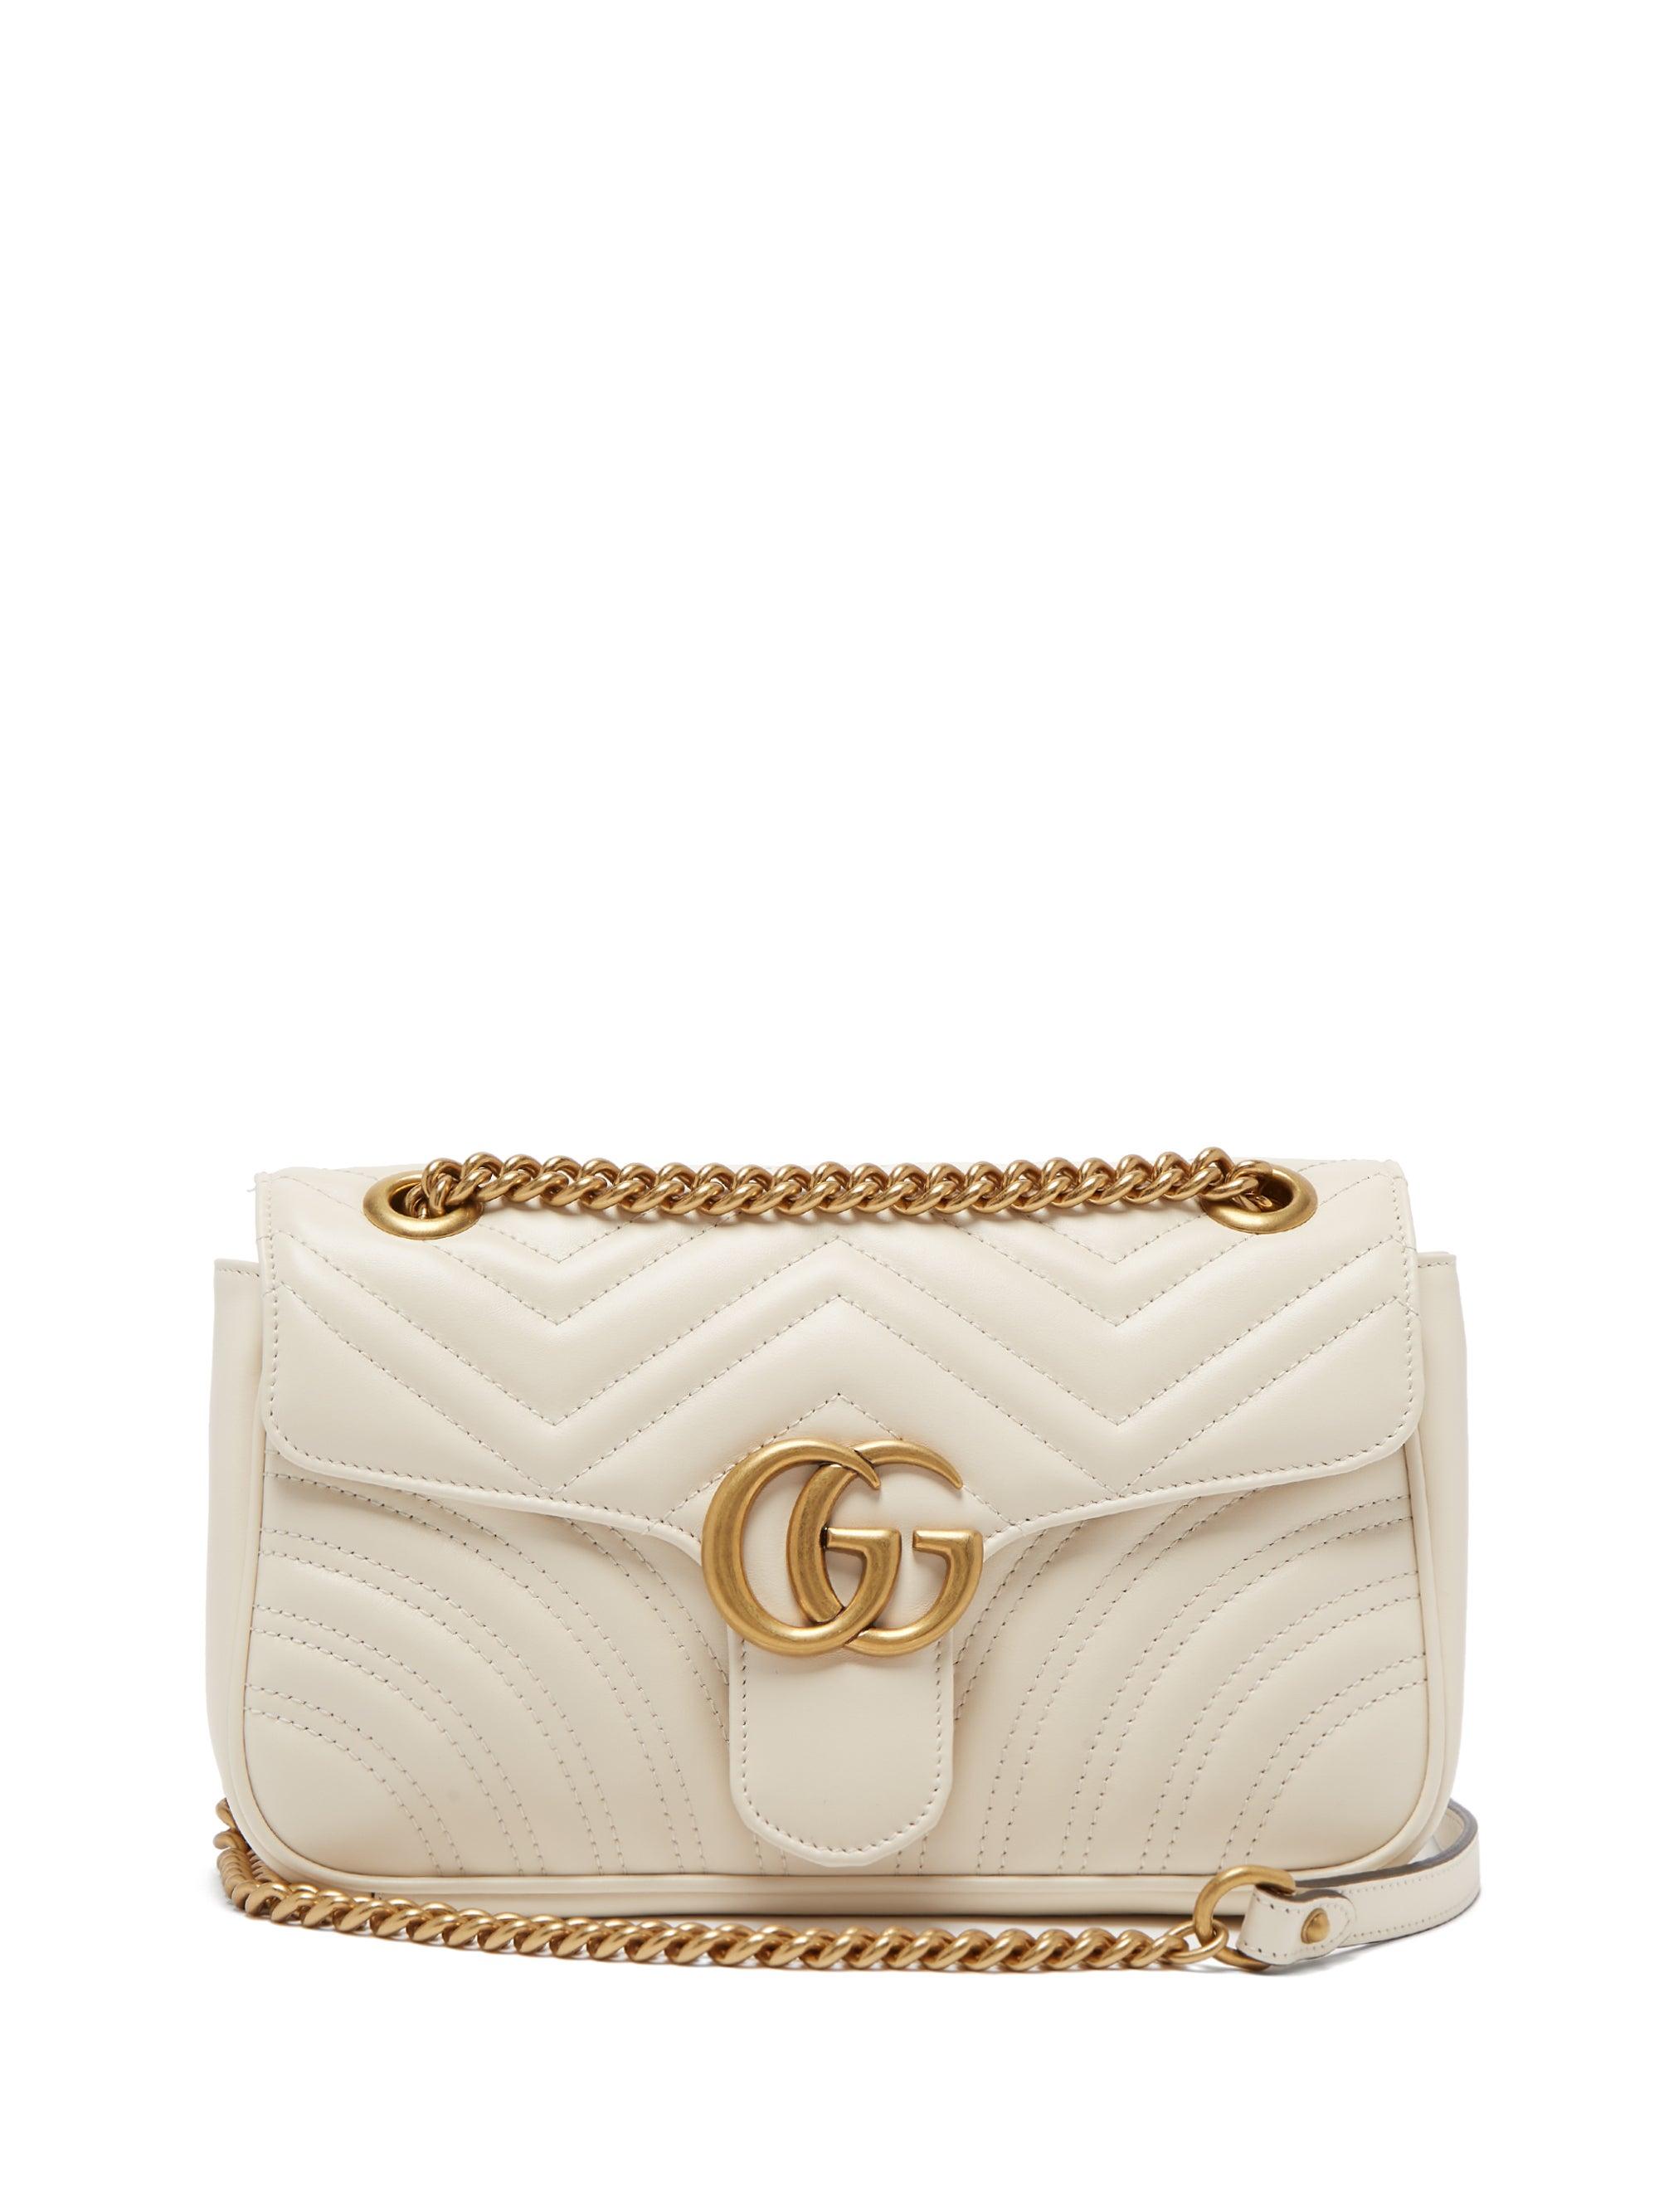 Gucci GG Marmont Small Quilted-leather Cross-body Bag in White - Lyst